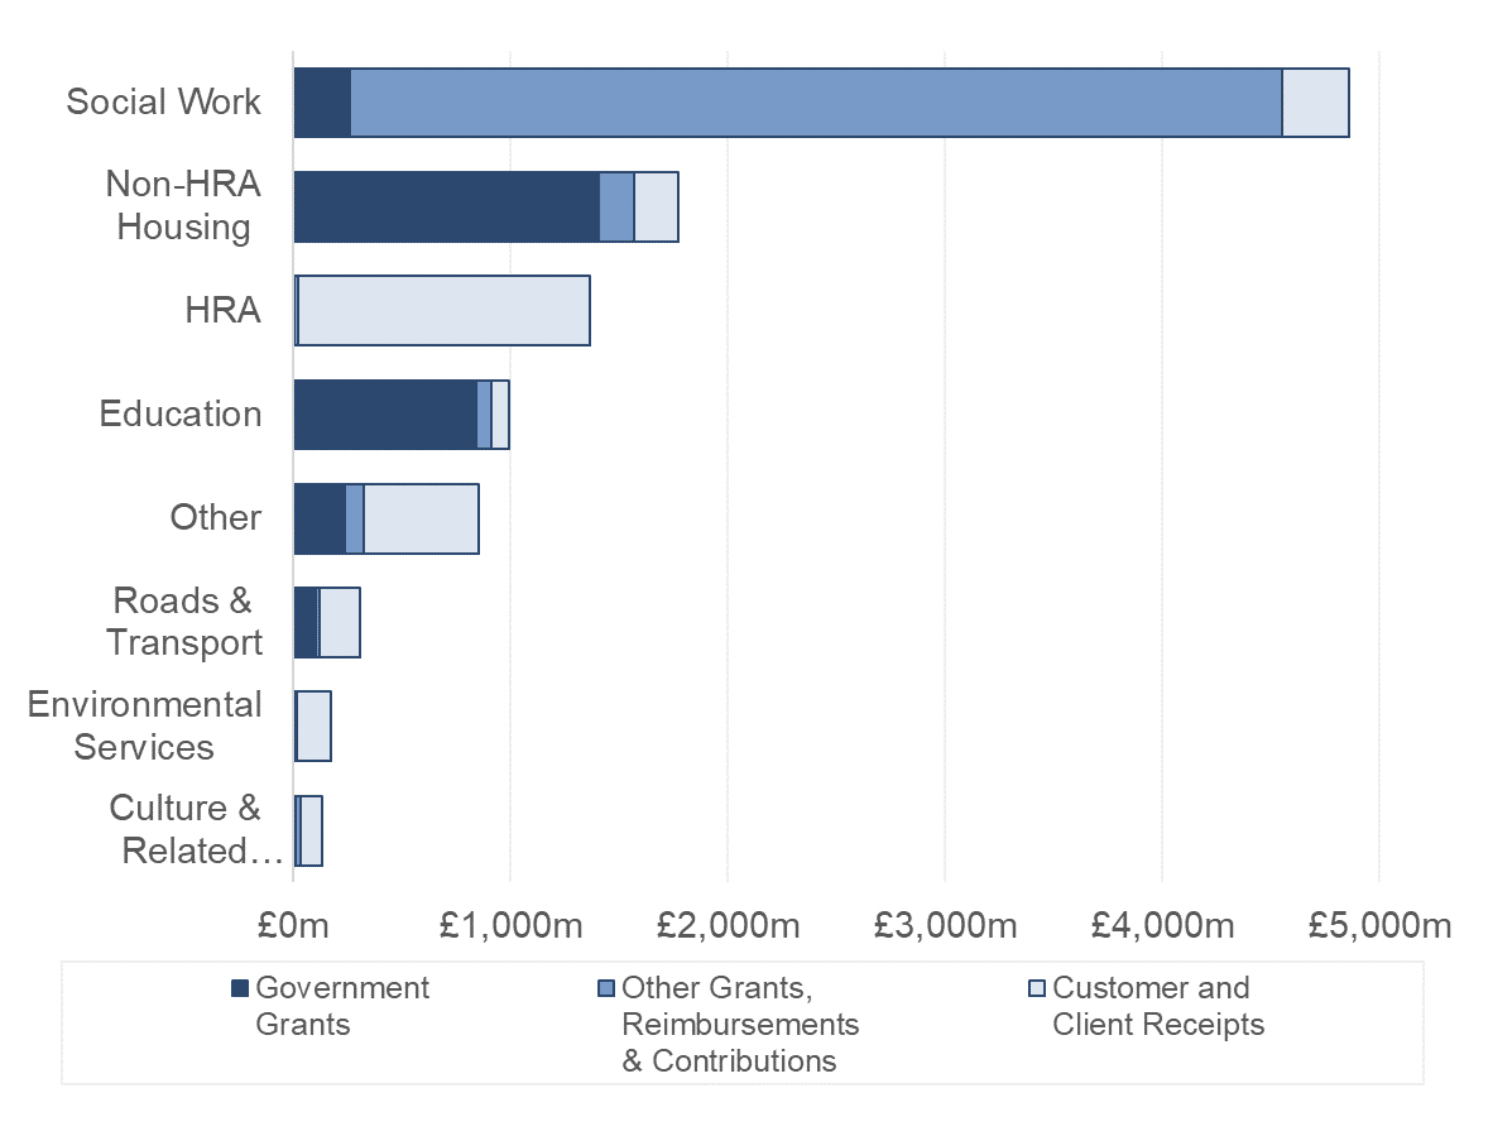 Bar chart showing the breakdown of gross service income by service and income type. Social Work has the largest amount of service income, the majority of which is from other grants, reimbursements and contributions. This relates to amounts received from IJBs to commission social care services, as well as contributions received from NHS Boards.